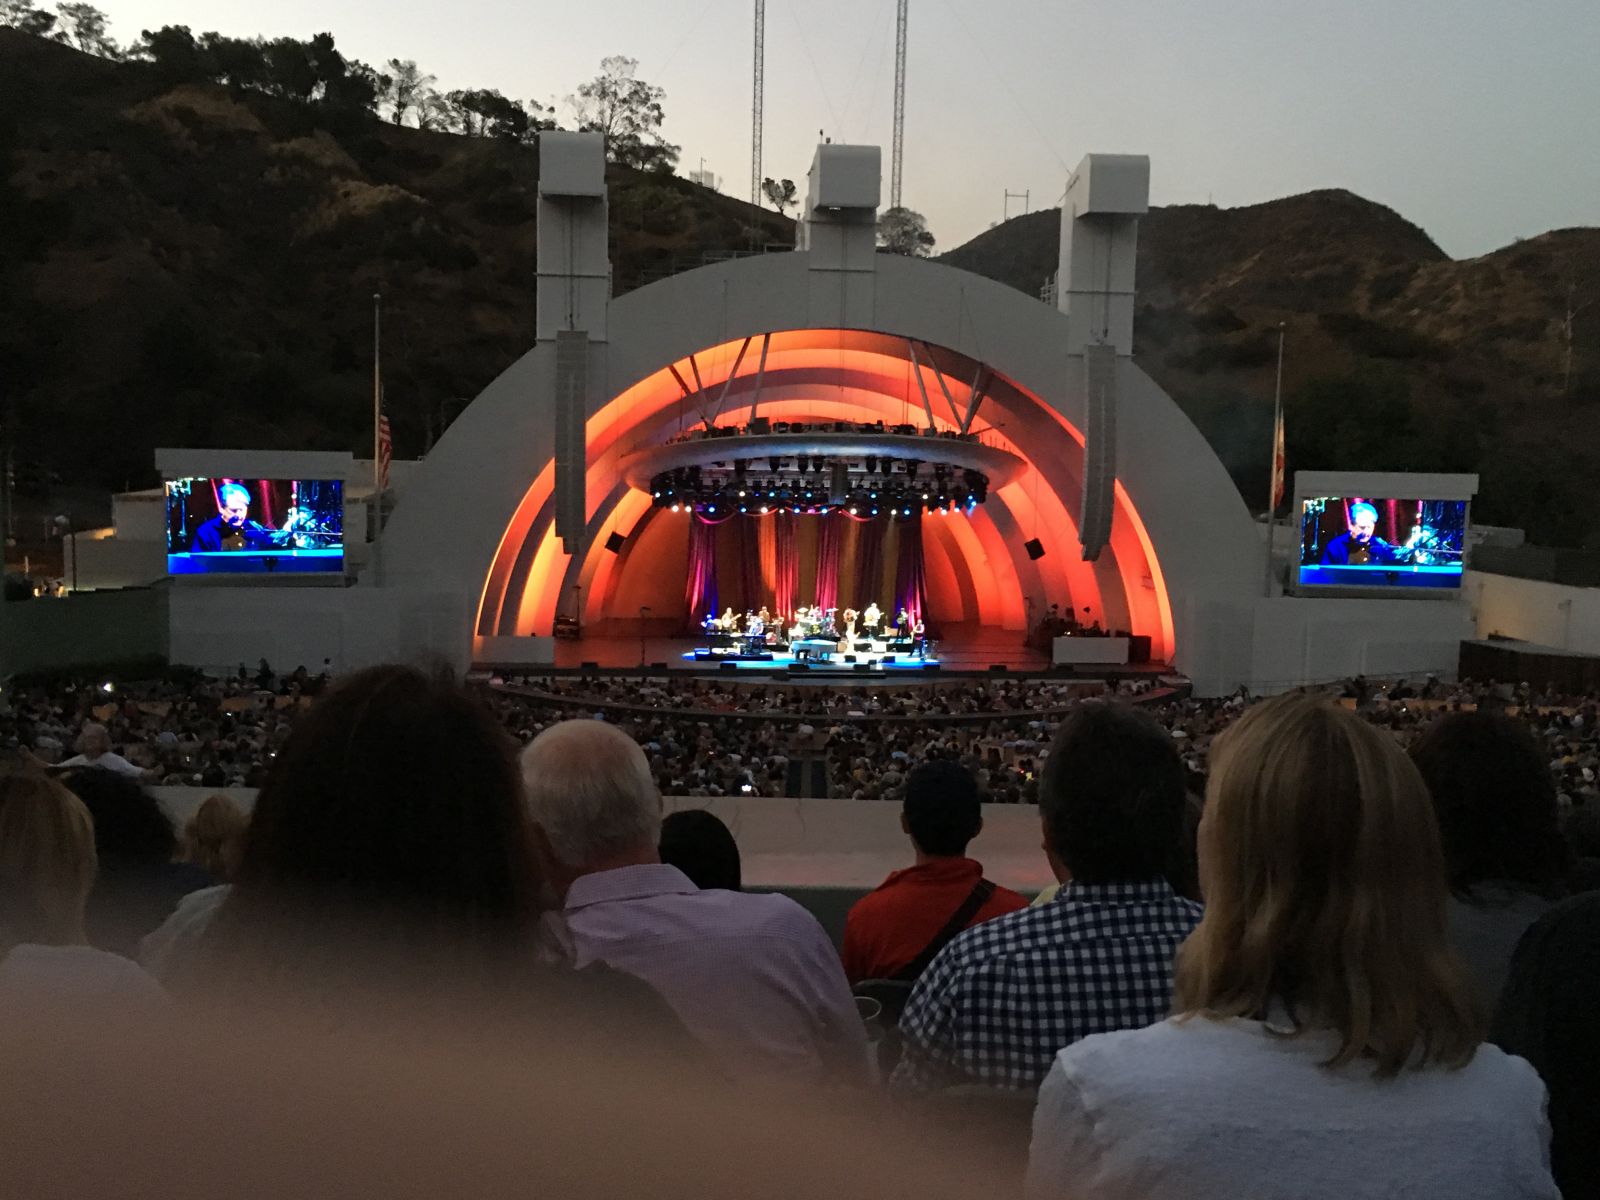 section j1, row 11 seat view  - hollywood bowl